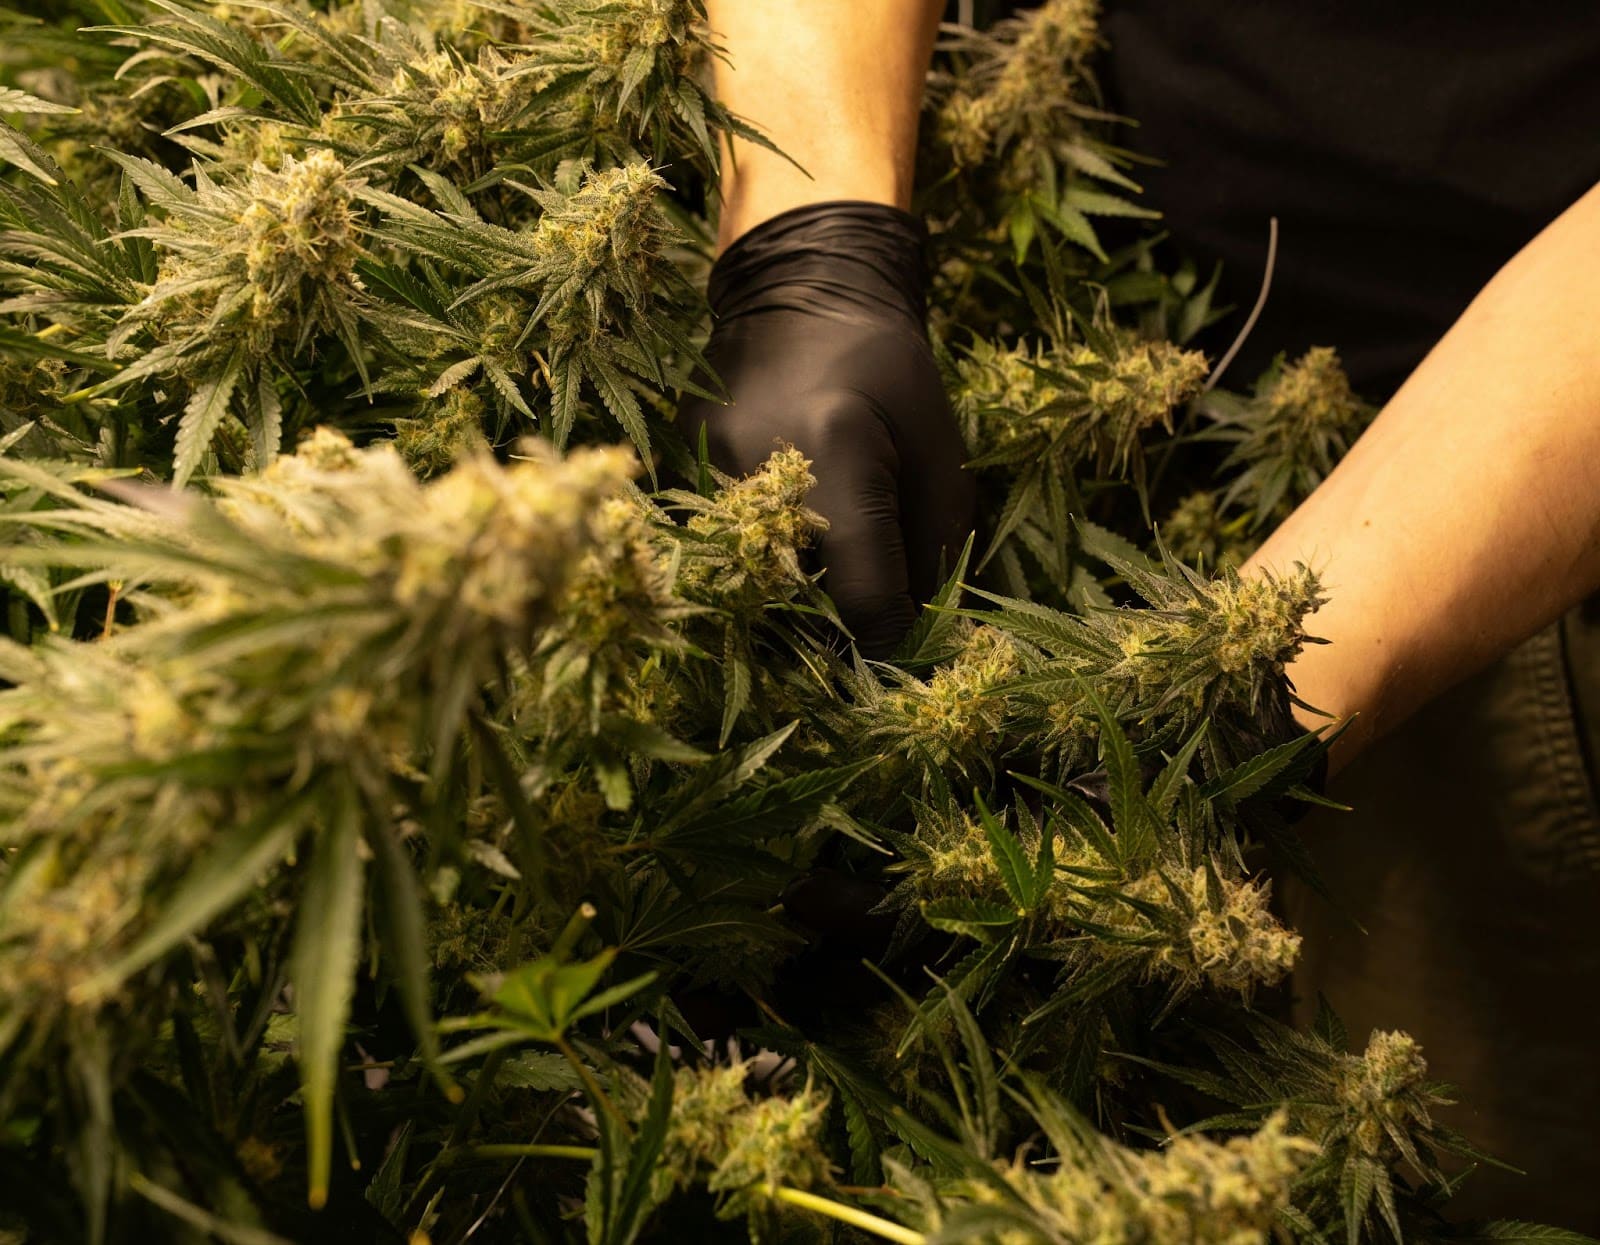 A pair of hands tending to the cannabis plant.